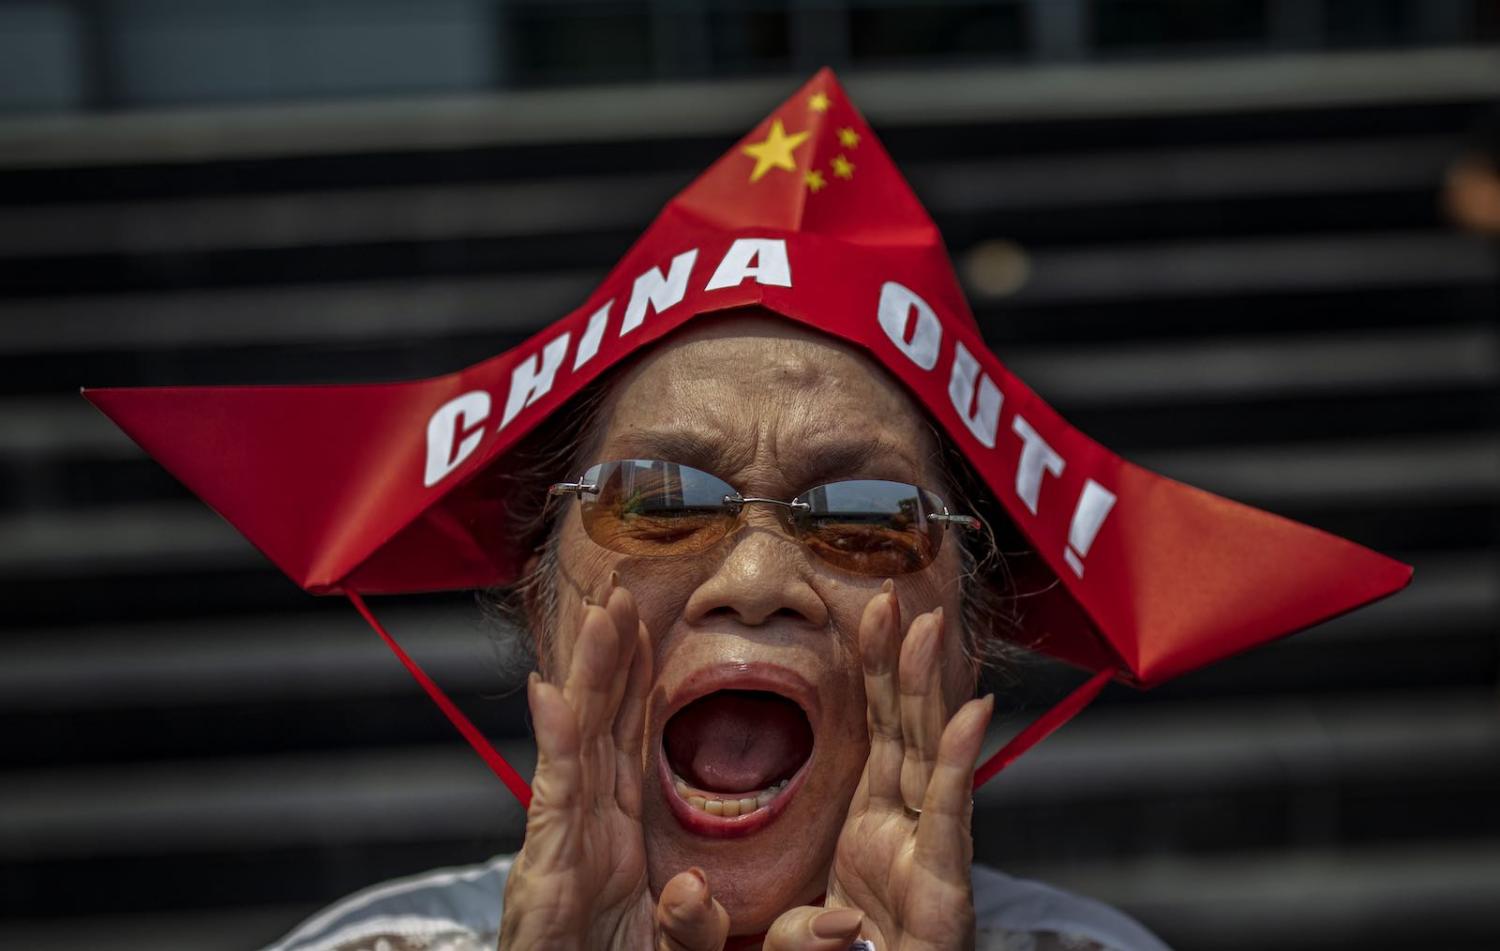 A woman shouts during a protest outside the Chinese Embassy in Manila, Philippines, 12 July 2019 (Photo: Ezra Acayan/Getty Images)